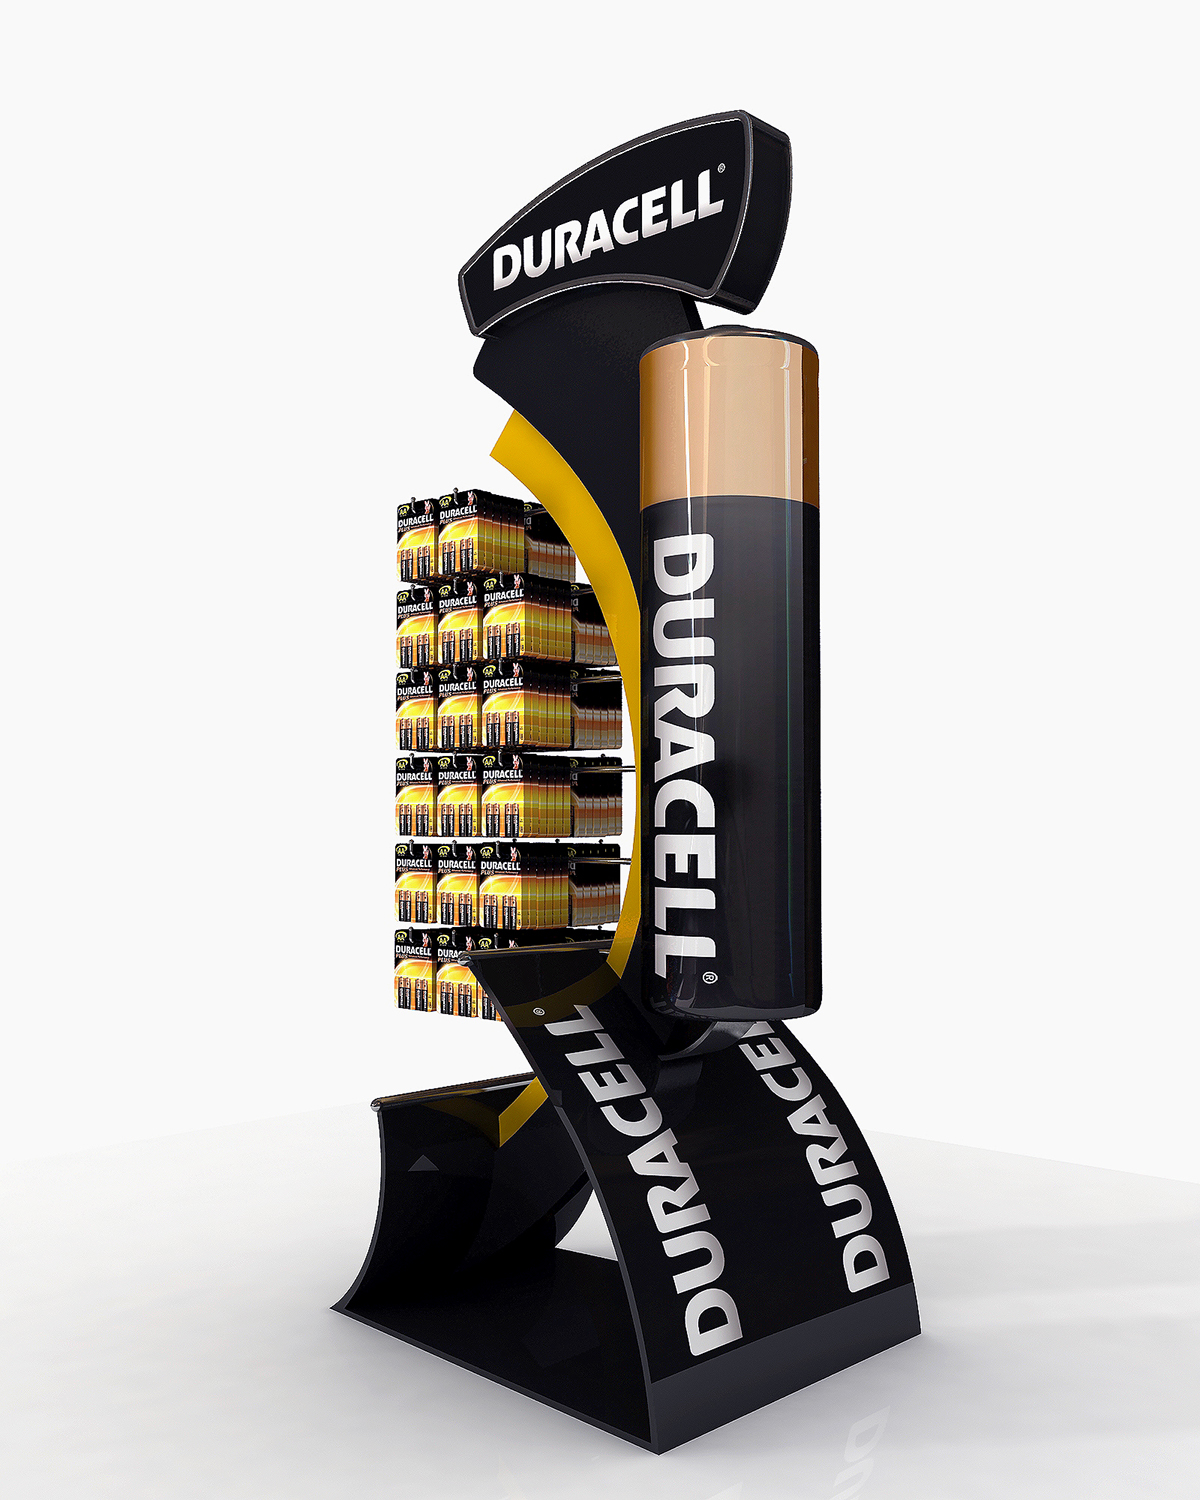 Duracell Display Stand